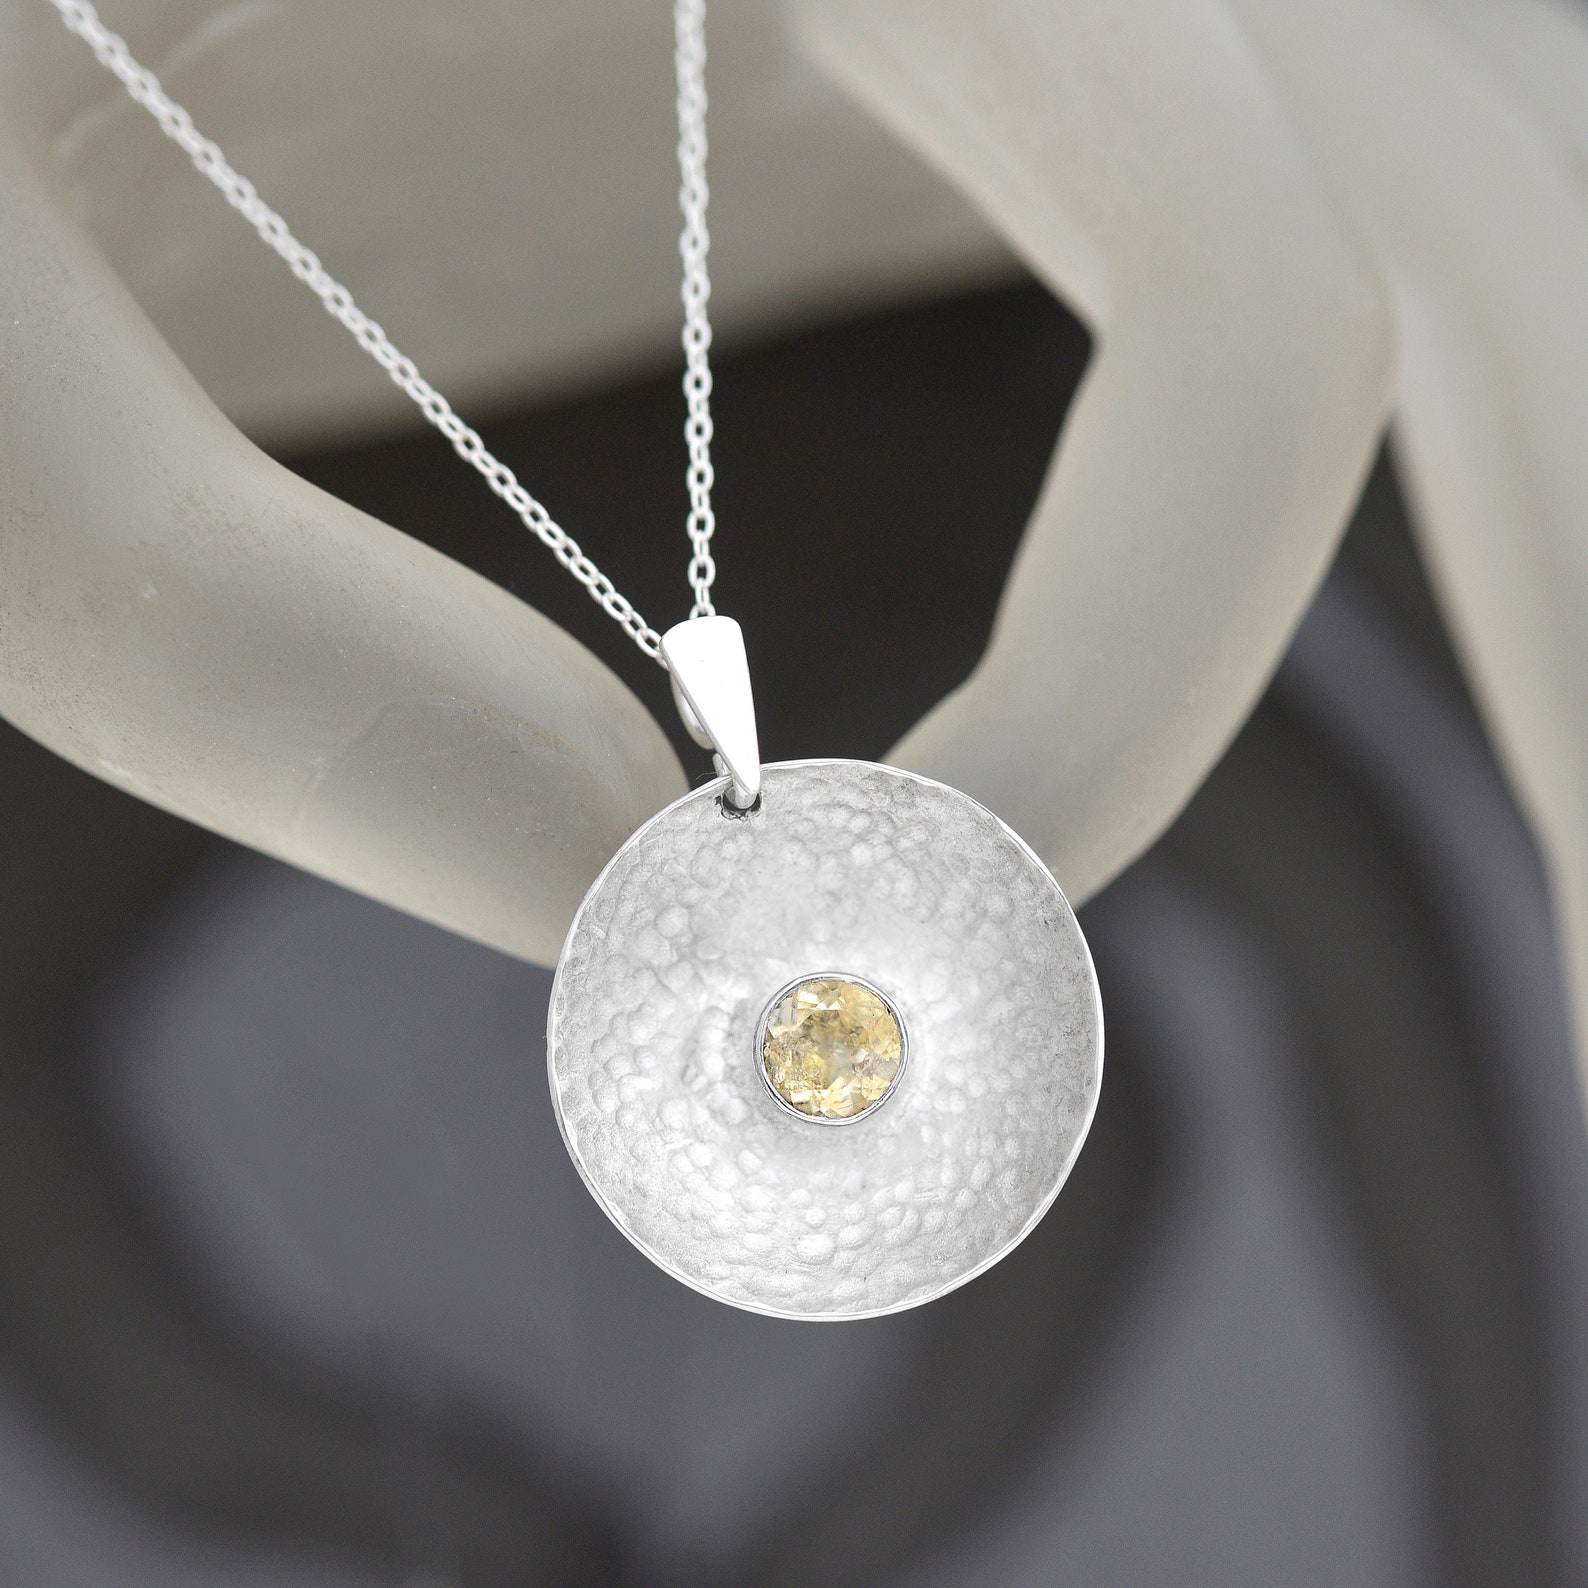 iana jewellery - Ian Caird Sterling Silver and yellow sapphire Necklace